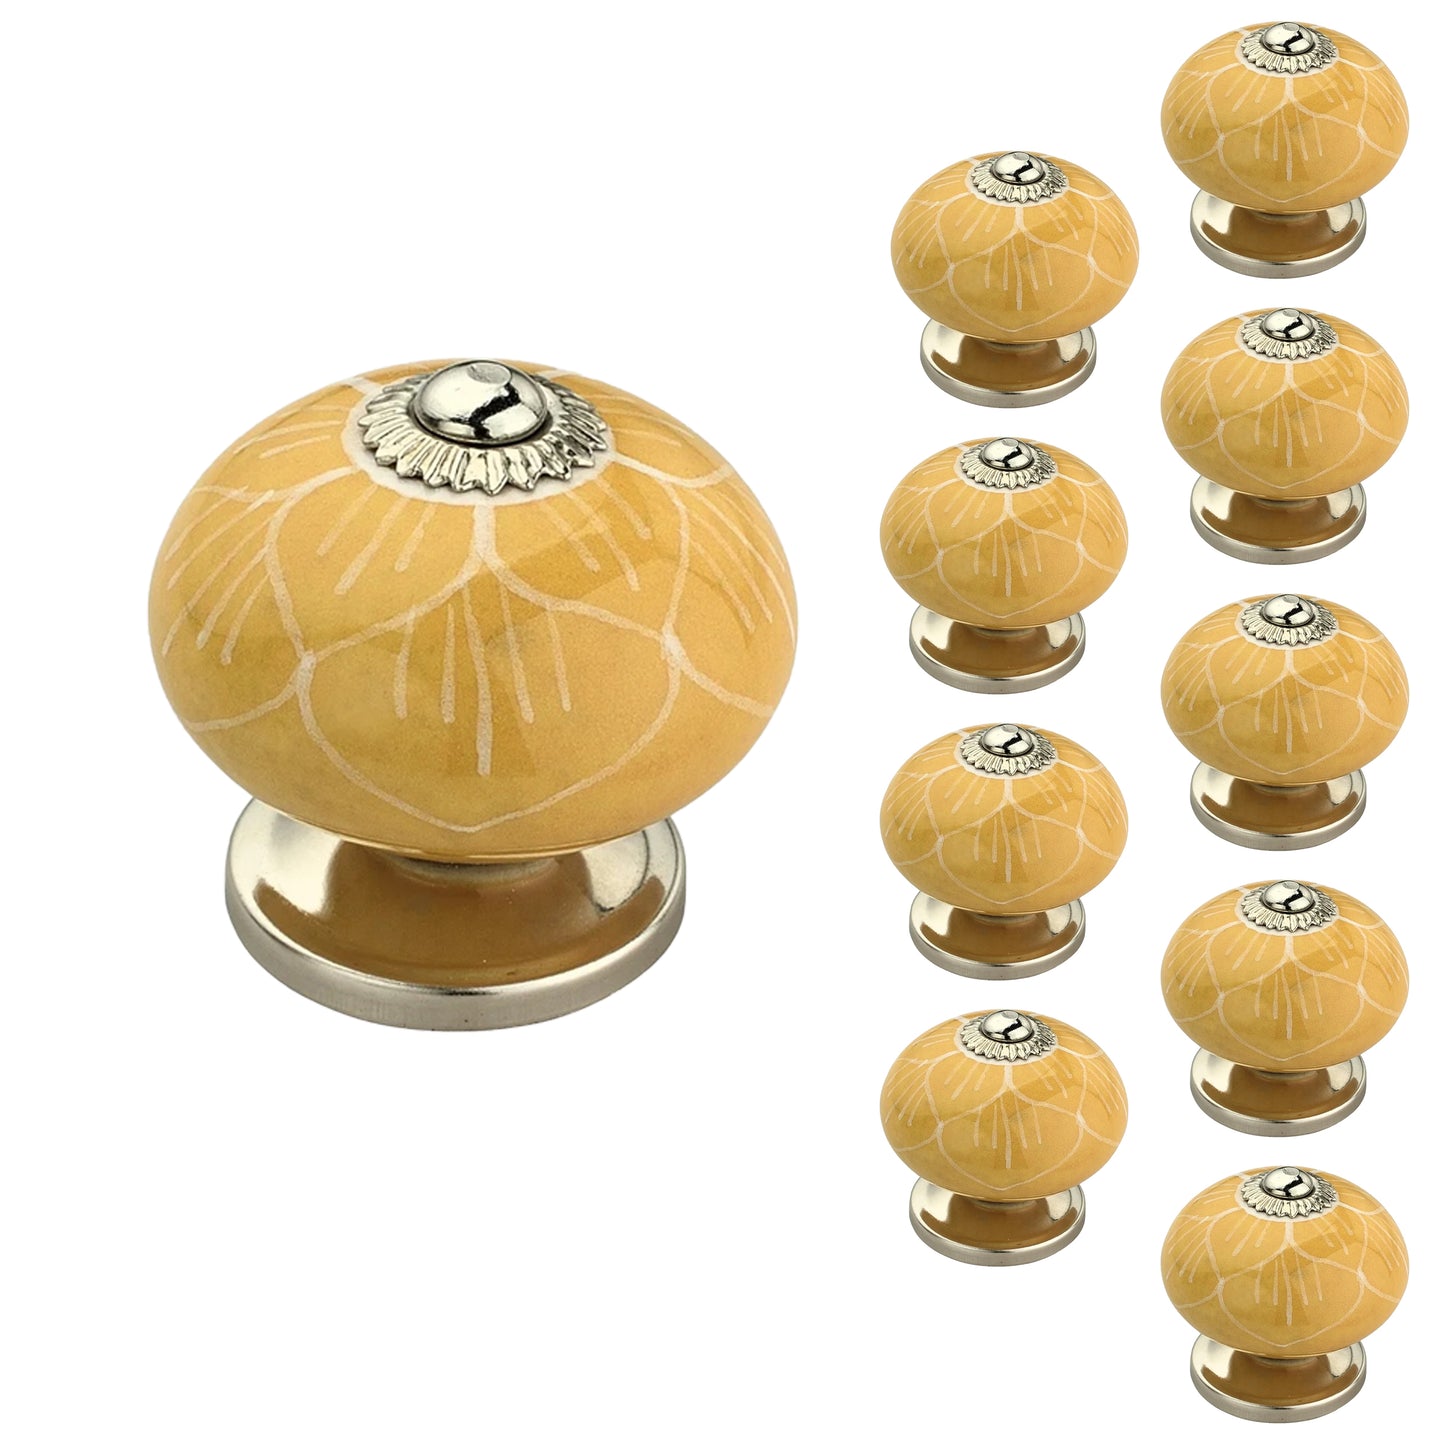 Mascot Hardware Stone Pattern 1-5/8 in. Yellow Cabinet Knob (Pack of 10)